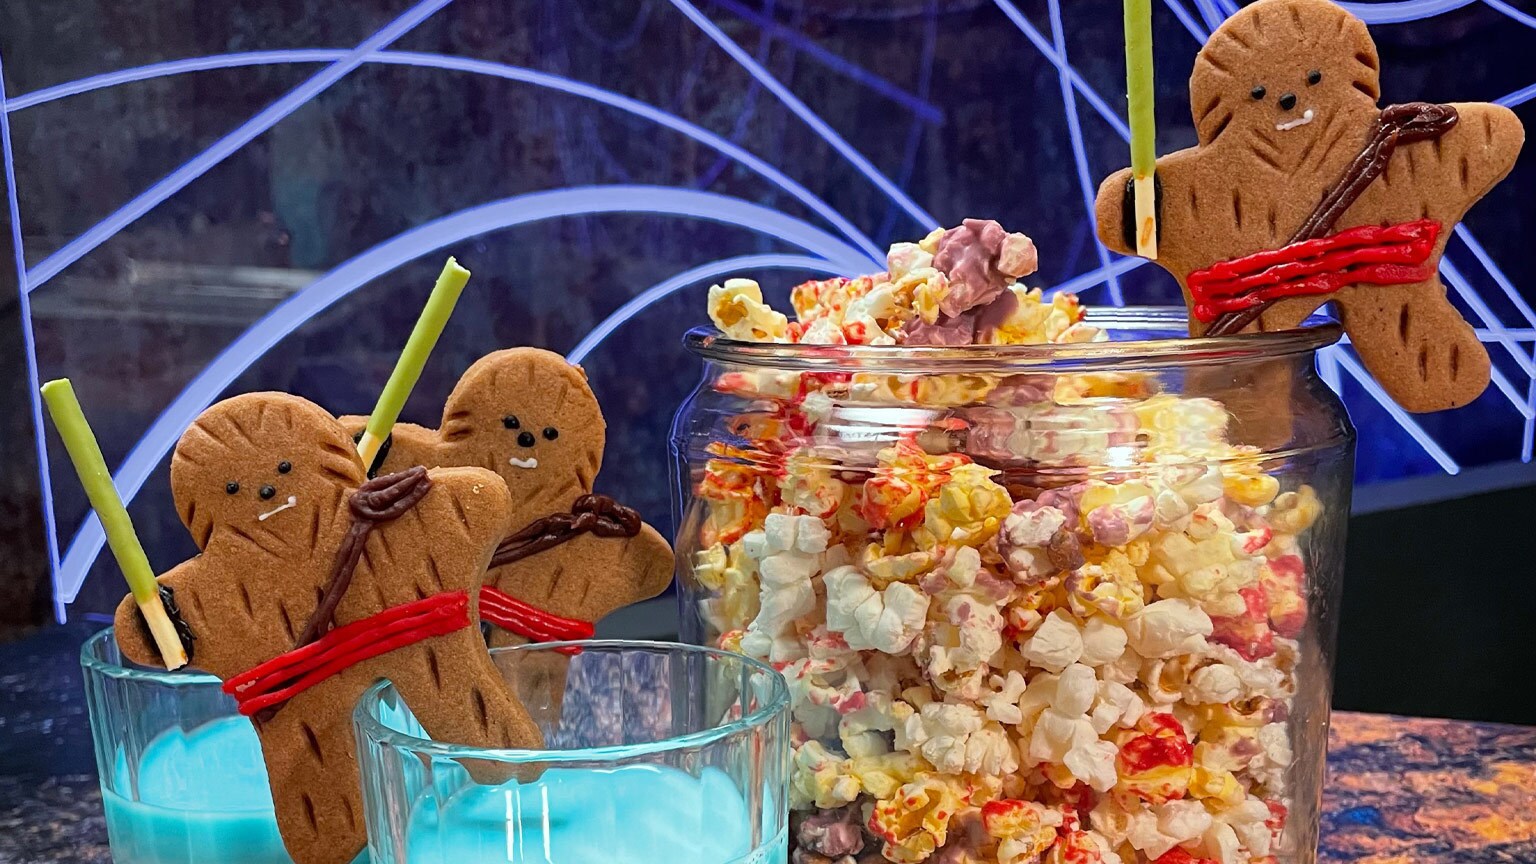 Feel the Force with These Gungi Wookiee Cookies